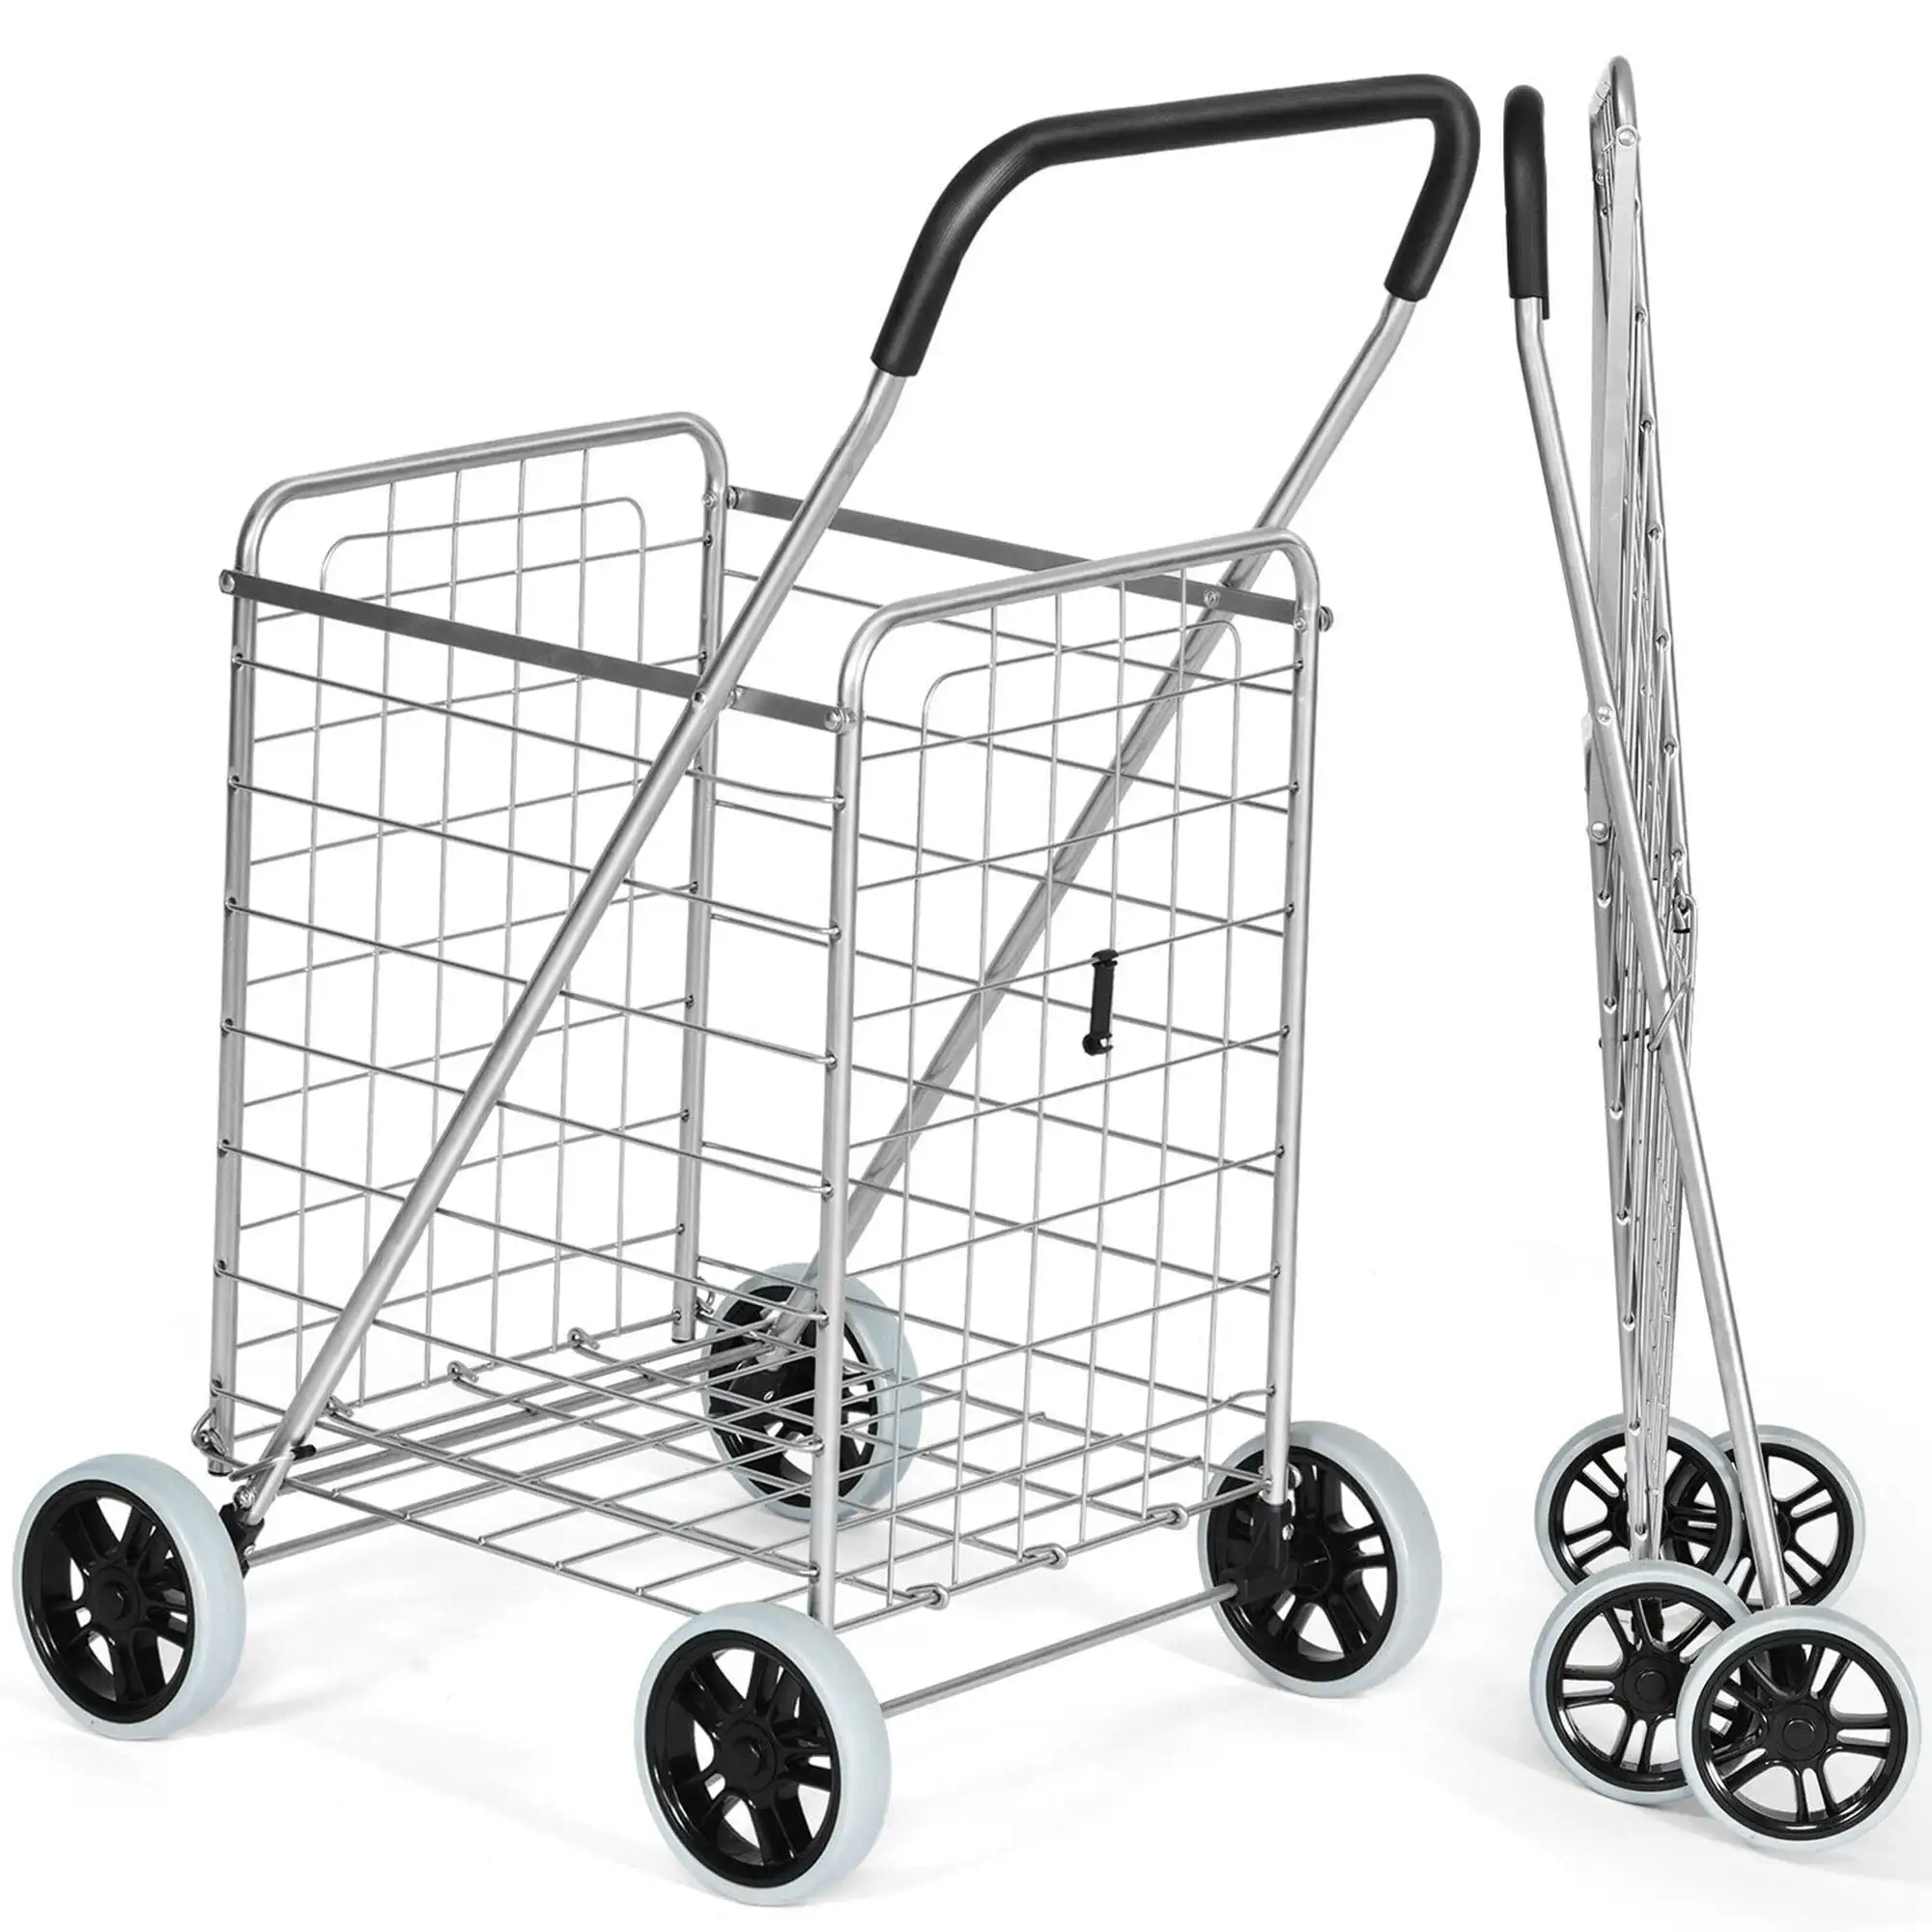 

Grocery Laundry Travel Folding Shopping Cart Utility Trolley Portable Silver